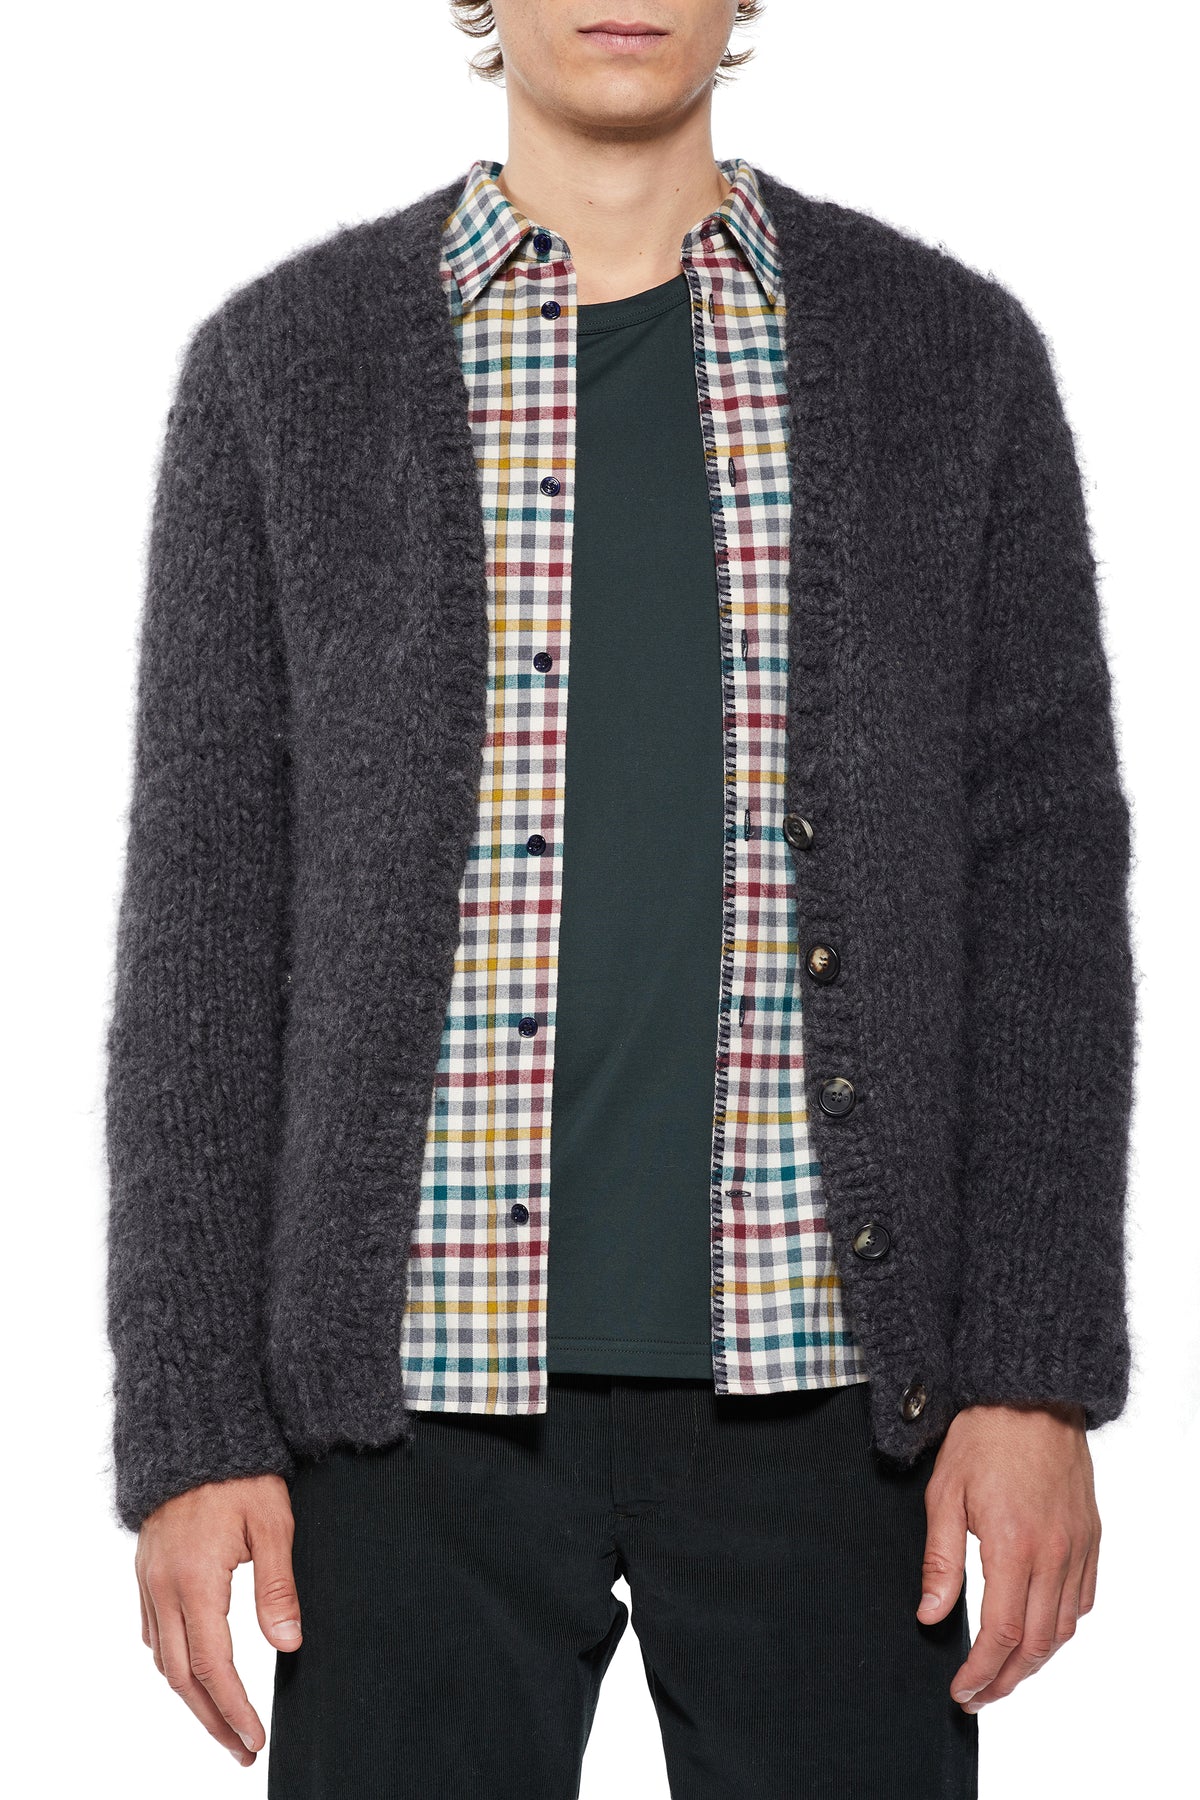 Simon Knit Cardigan in Charcoal Welfat Cashmere